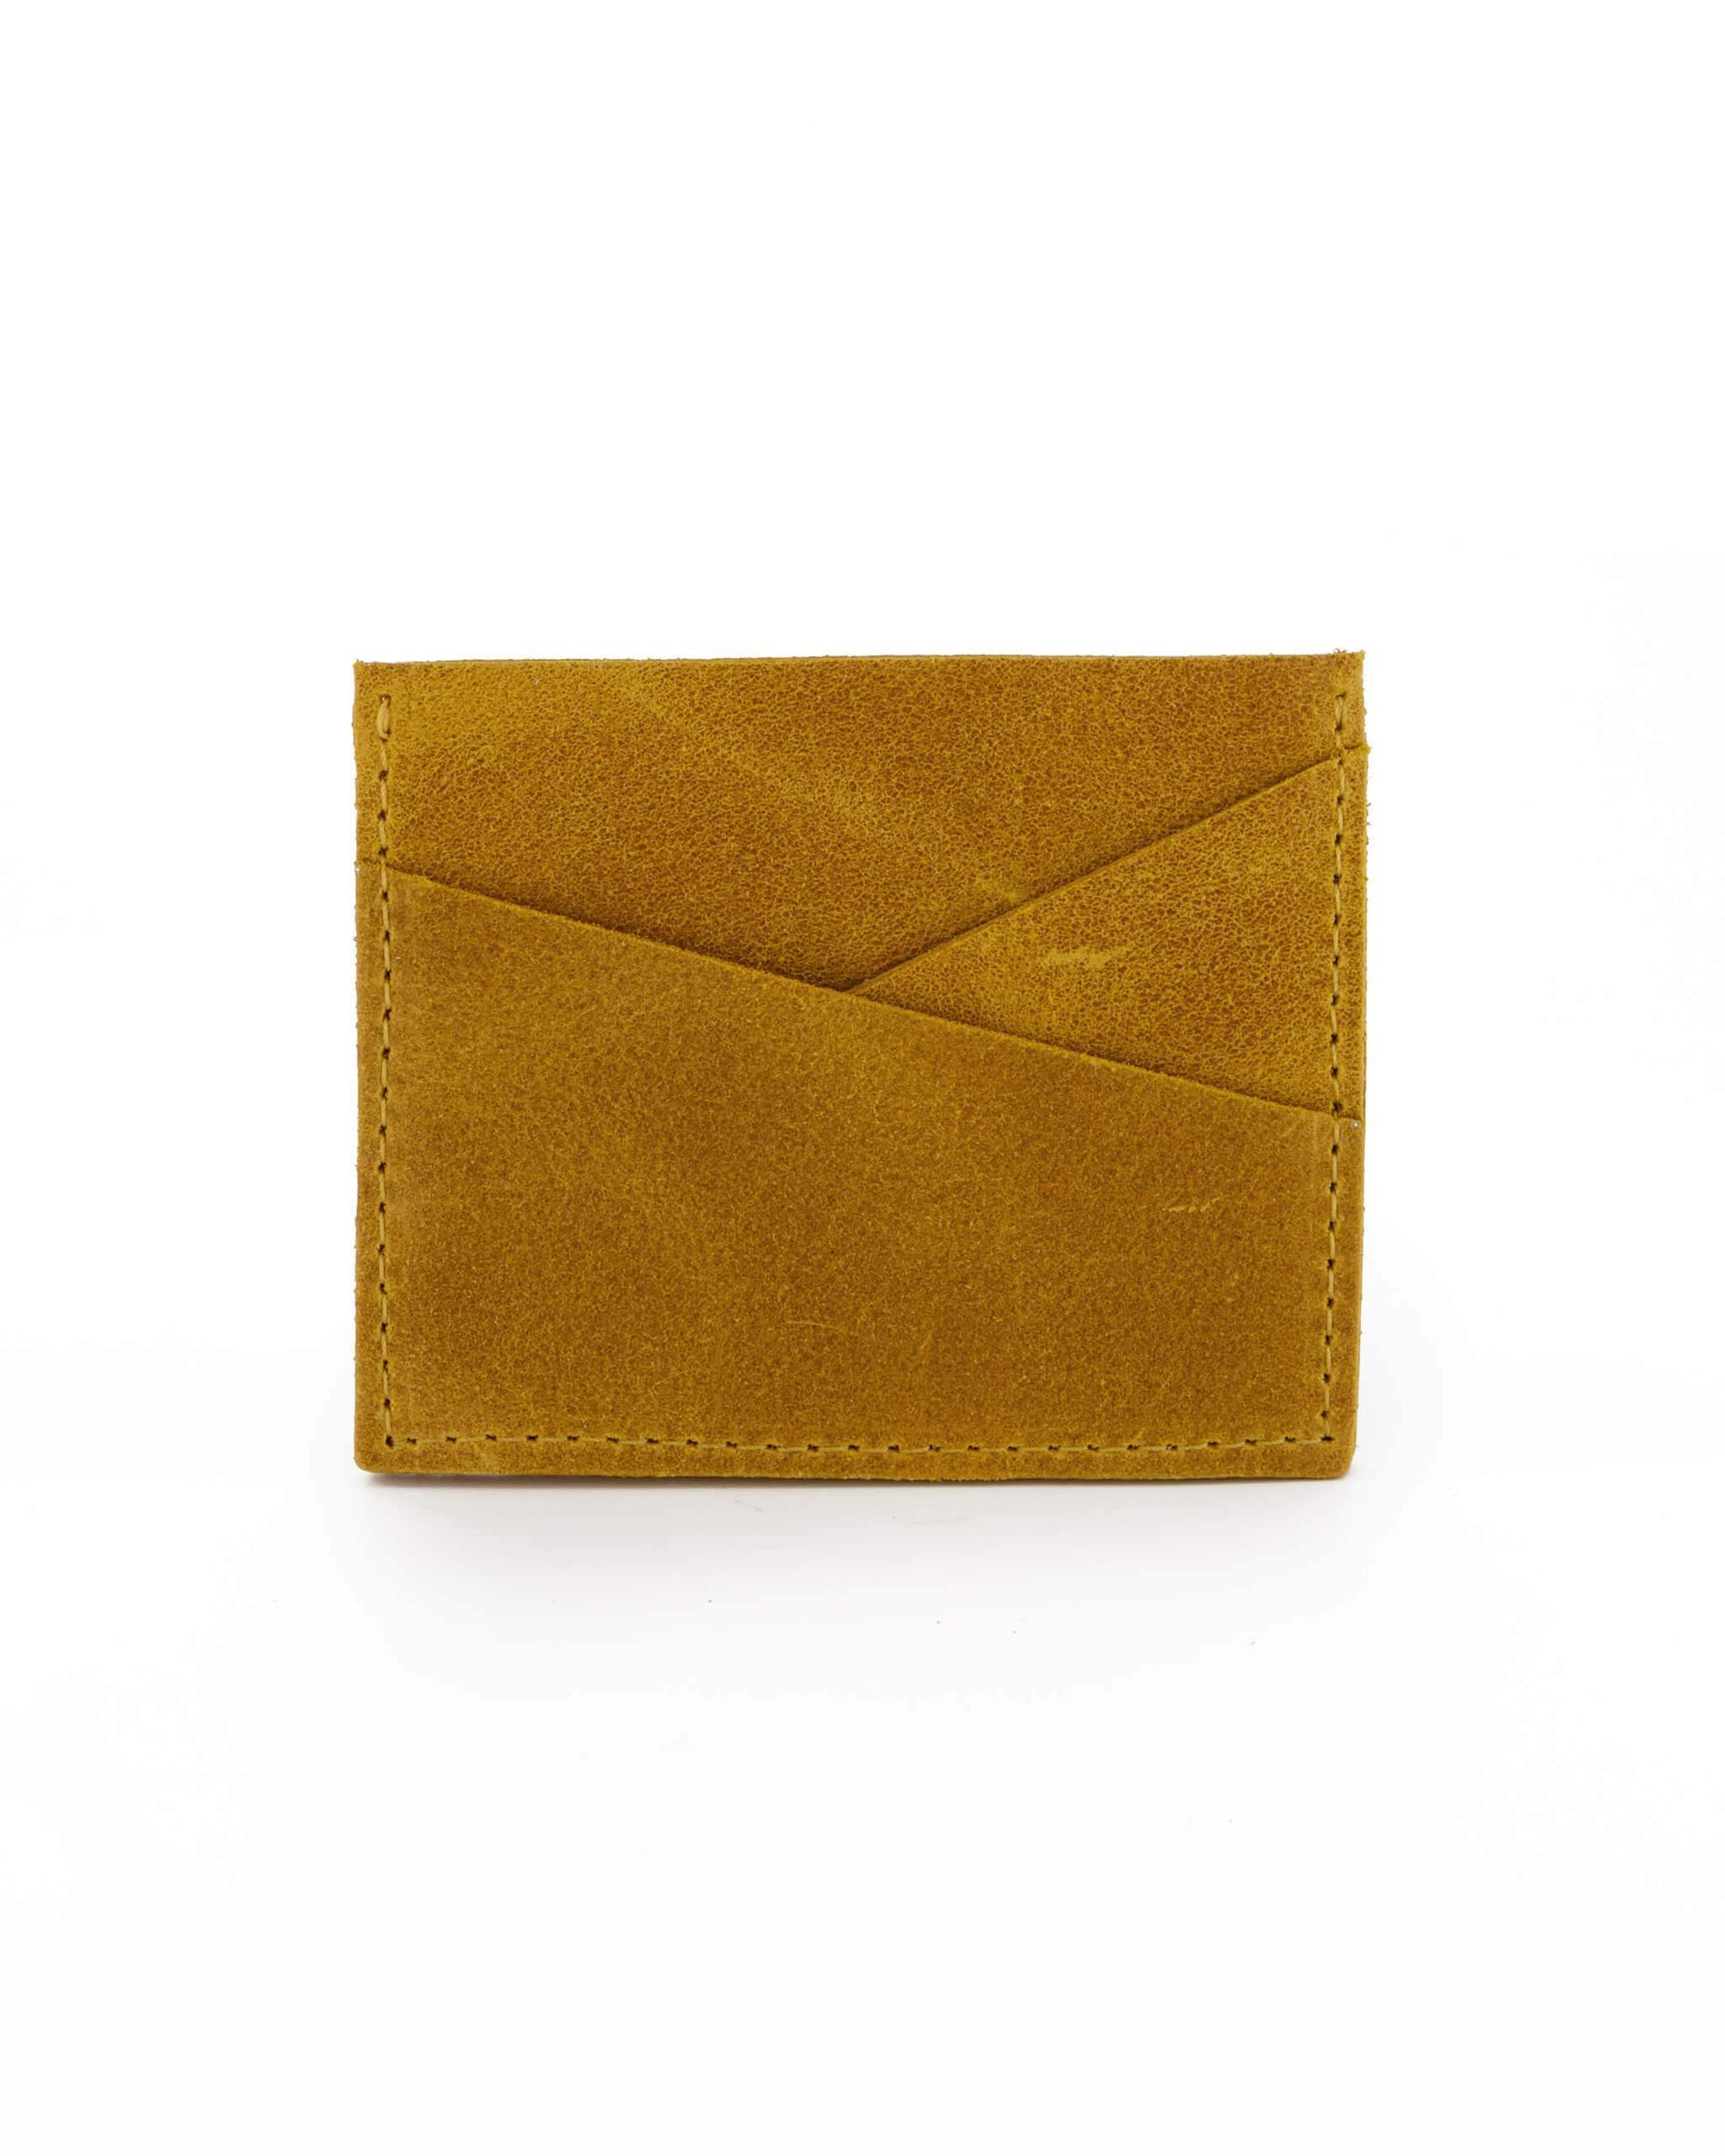 yellow leather cards case, leather pouch, leather pouch, small gift, accessories, leather case, cards holder case, handmade leather good, gift for her, gift for her, cards holder, coin purse, brown leather wallet, monogram, custom business cards, handmade cards holder, personalized, business cards case, ||Mustard||